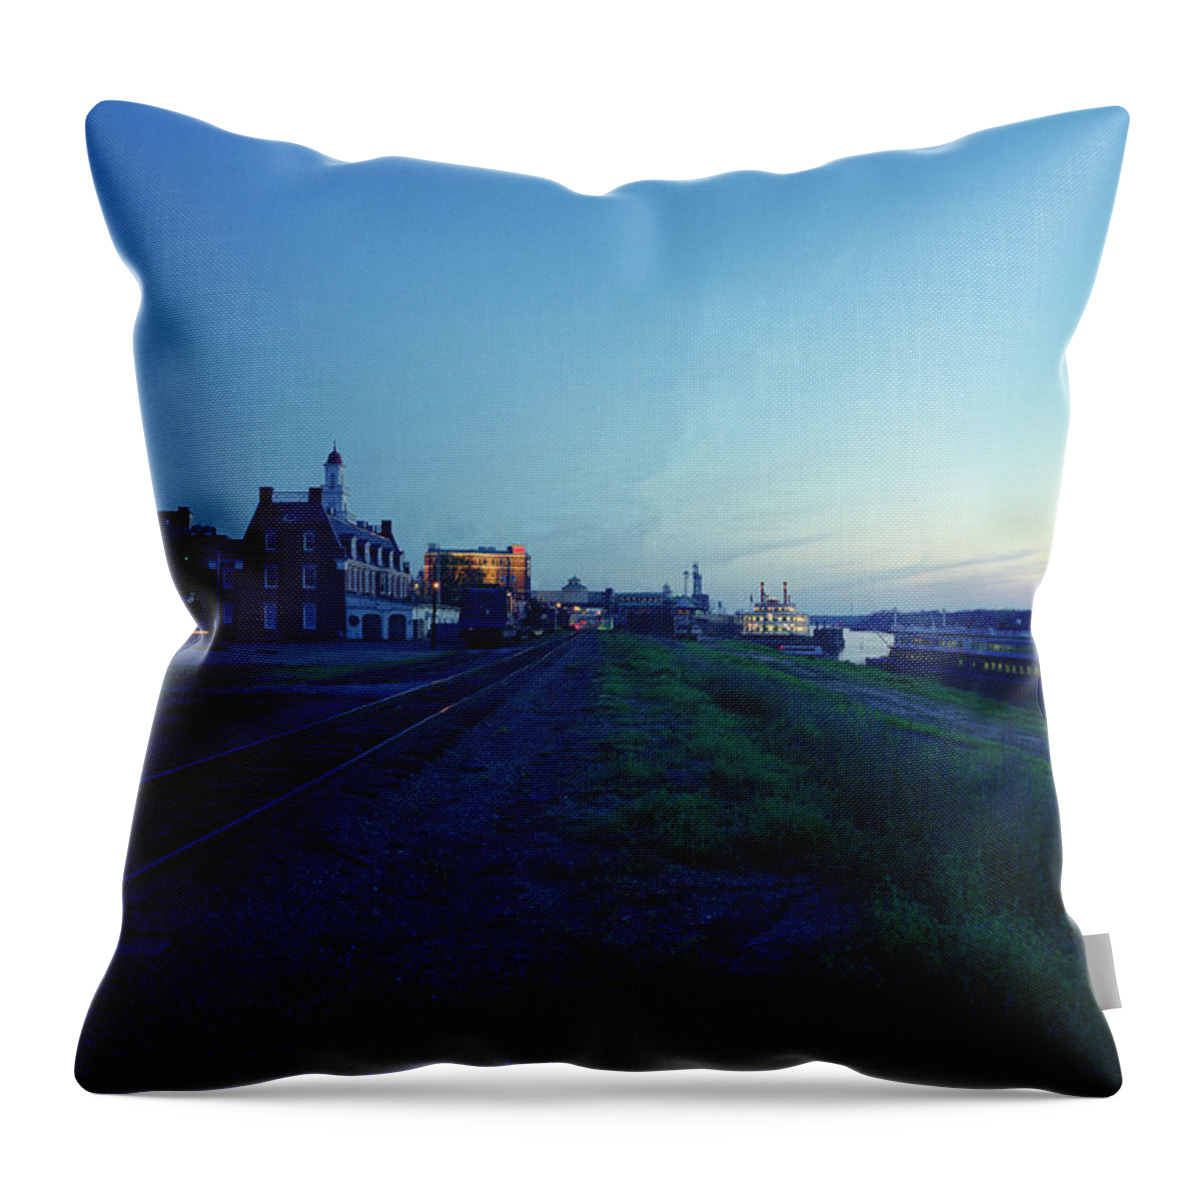 Landscape Throw Pillow featuring the photograph Night Moves on the Mississippi by Jan W Faul